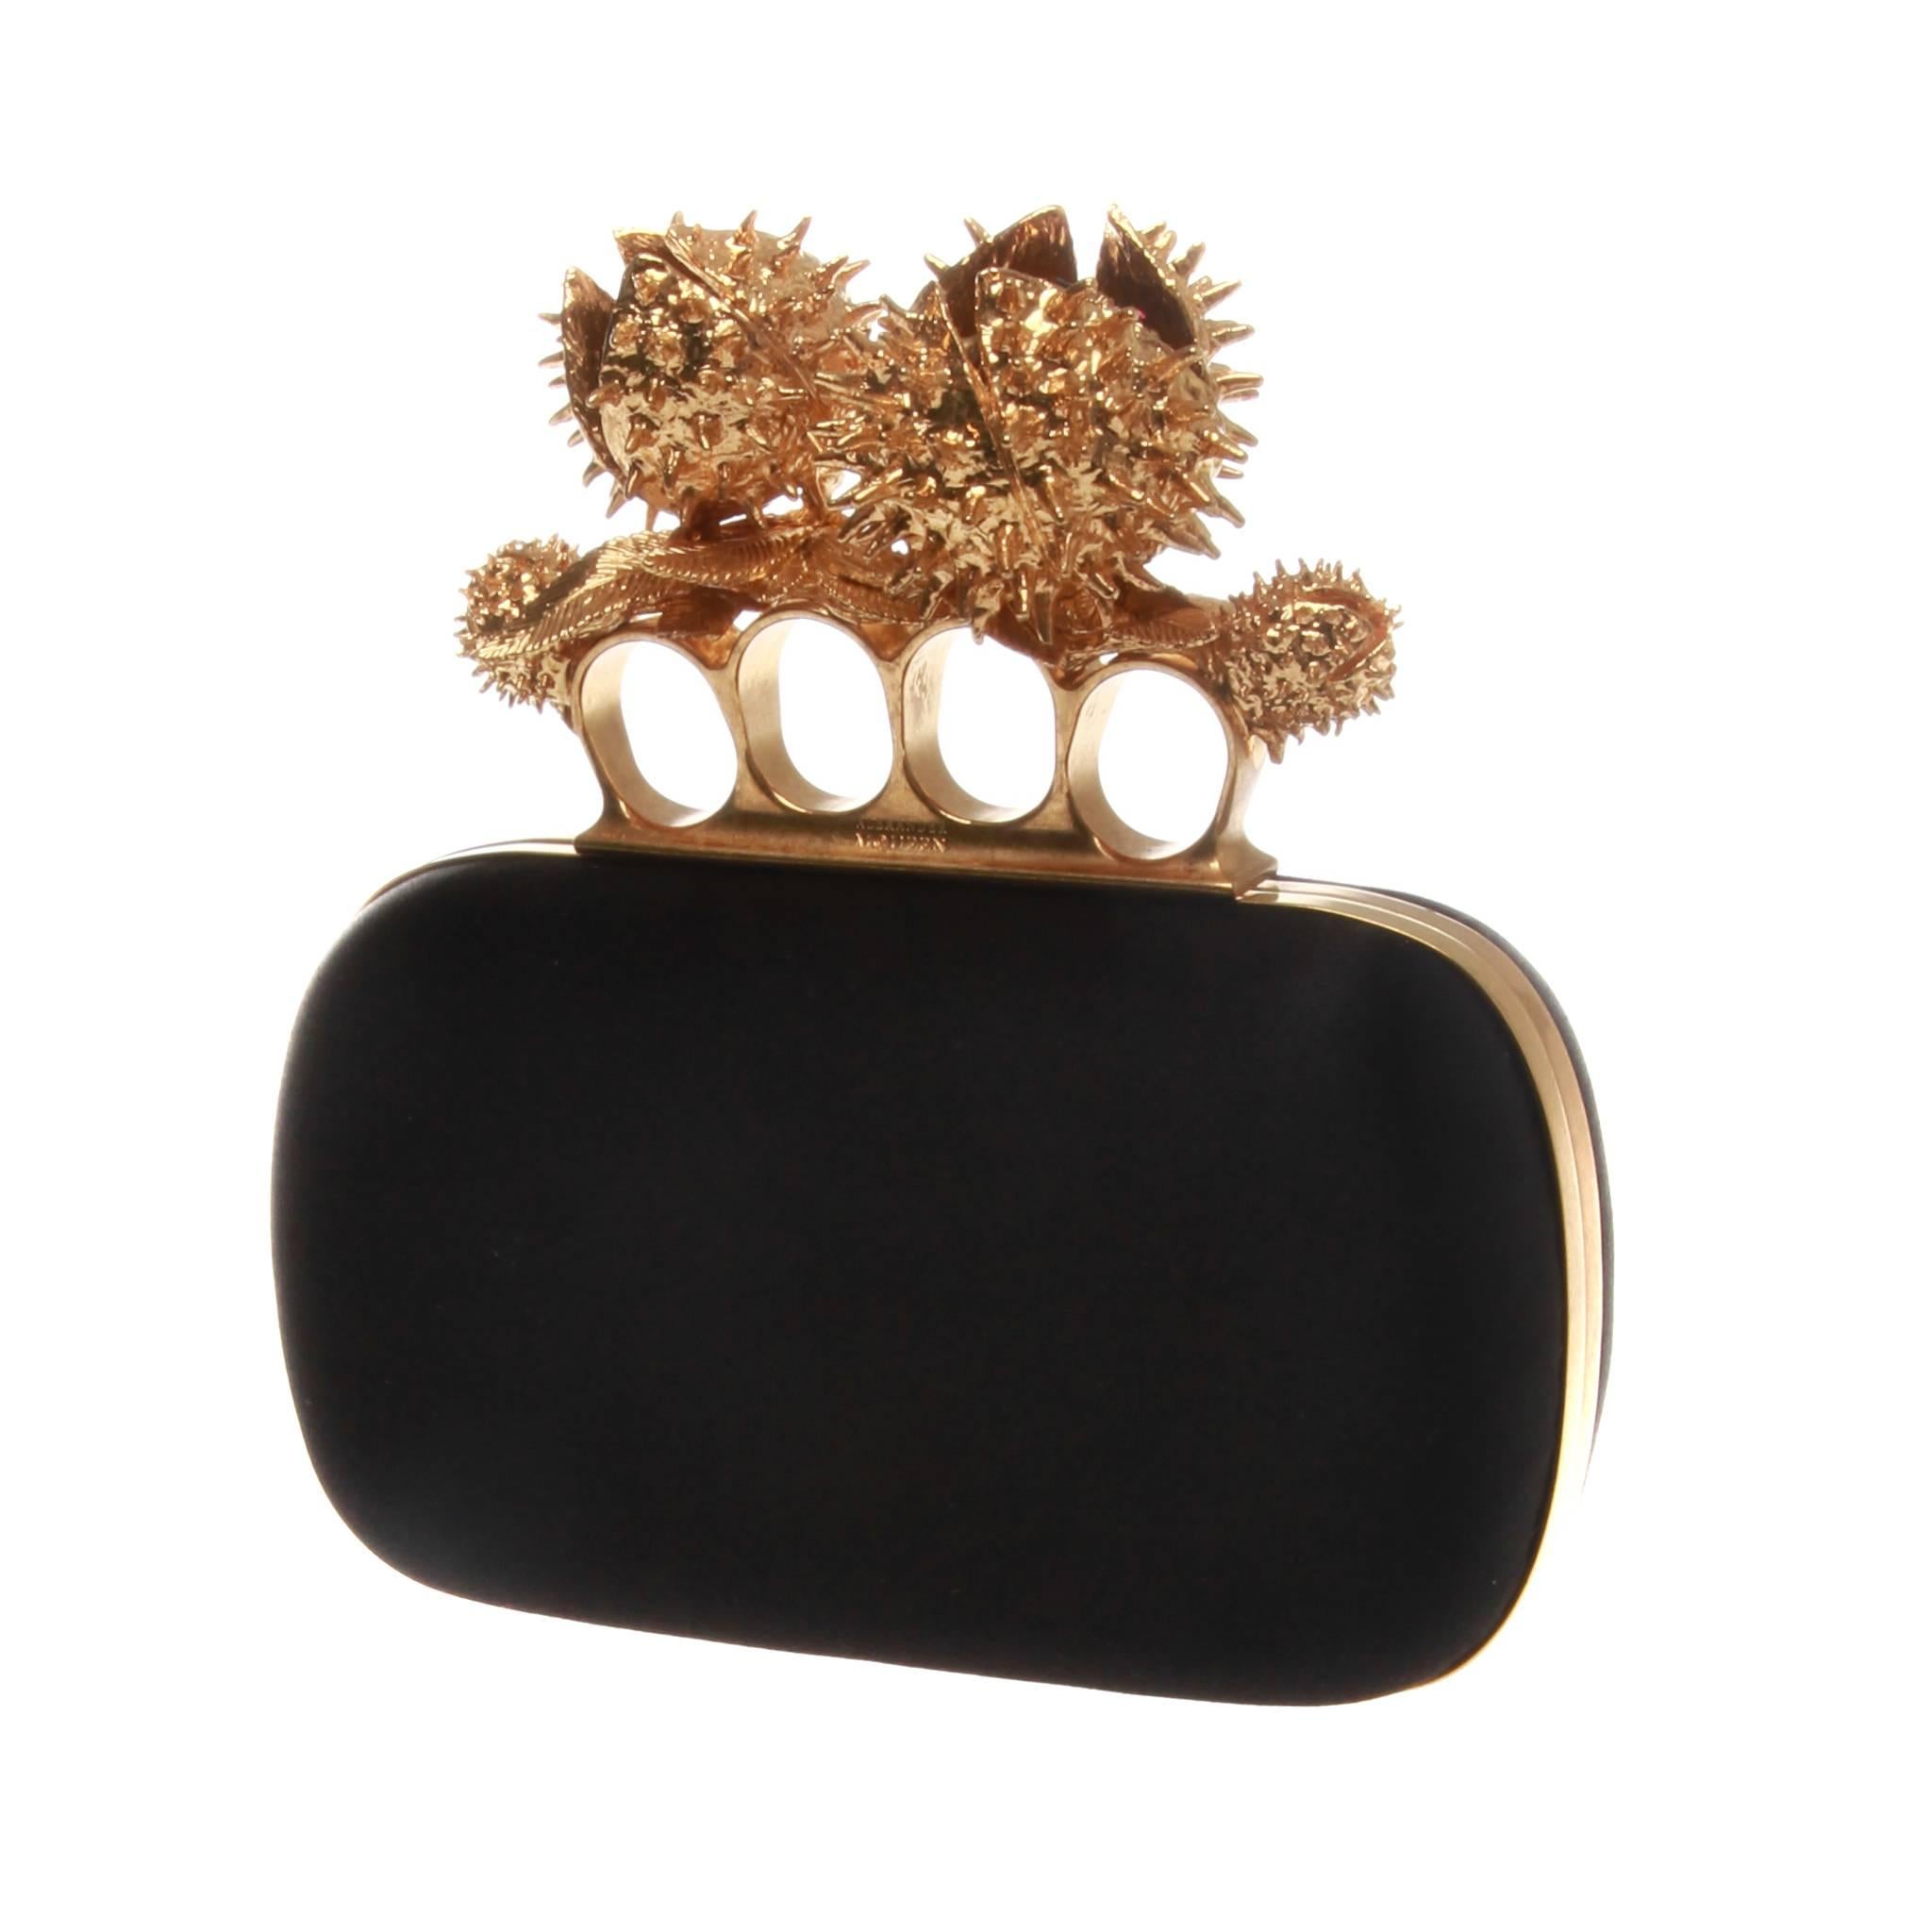 Stunning Alexander McQueen clutch of black satin starring a vibrant gold-tone metal elaboration. This masterfully crafted knuckle-duster style handle doubles as the fastening clasp and features open horse chestnuts with burgundy Swarovski stone